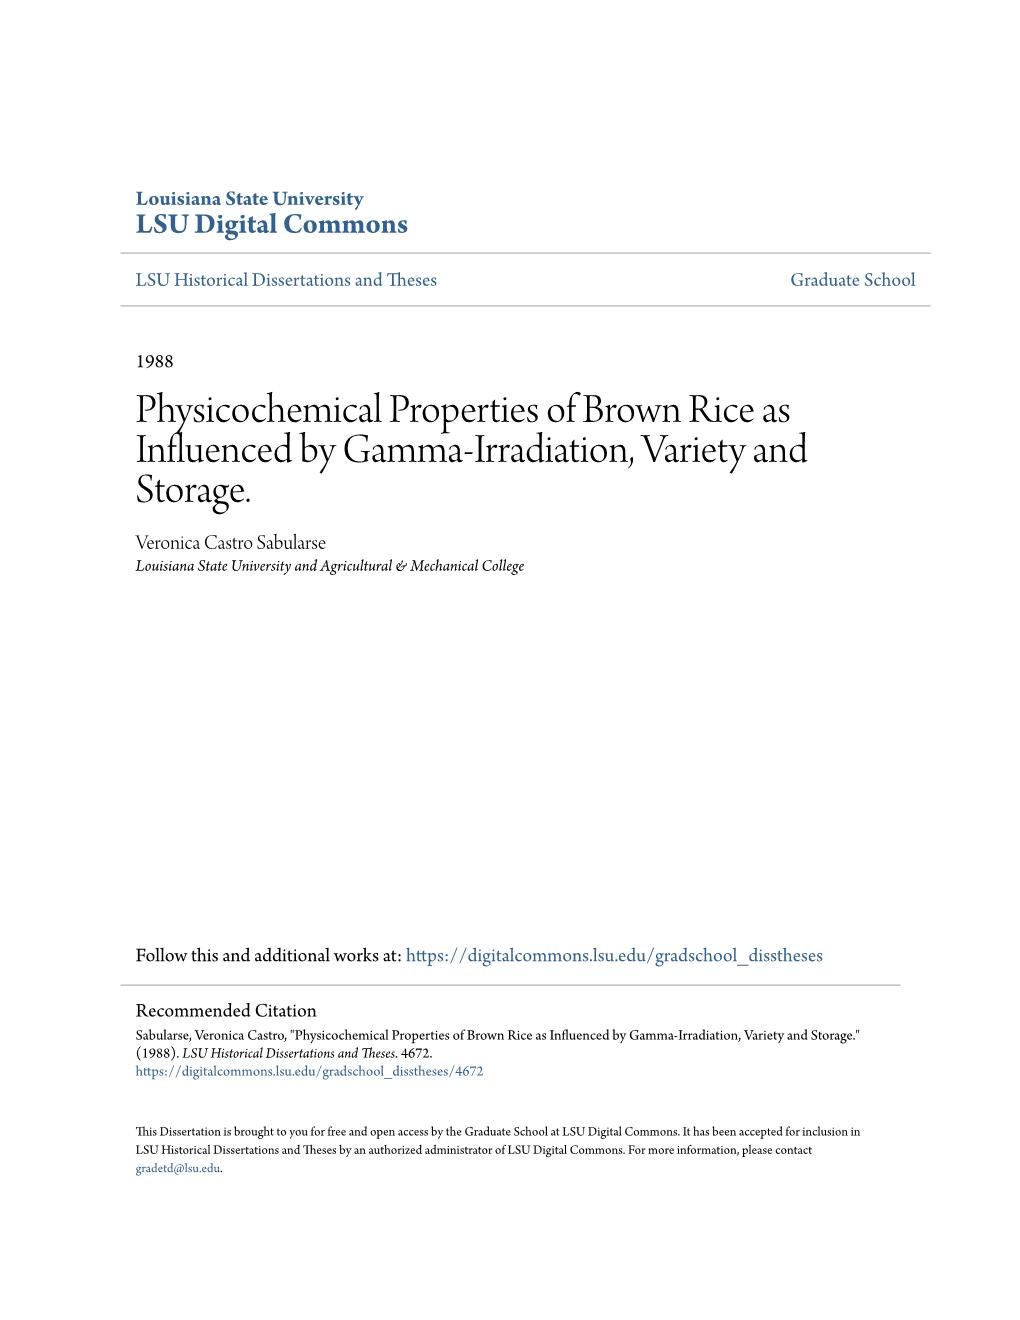 Physicochemical Properties of Brown Rice As Influenced by Gamma-Irradiation, Variety and Storage